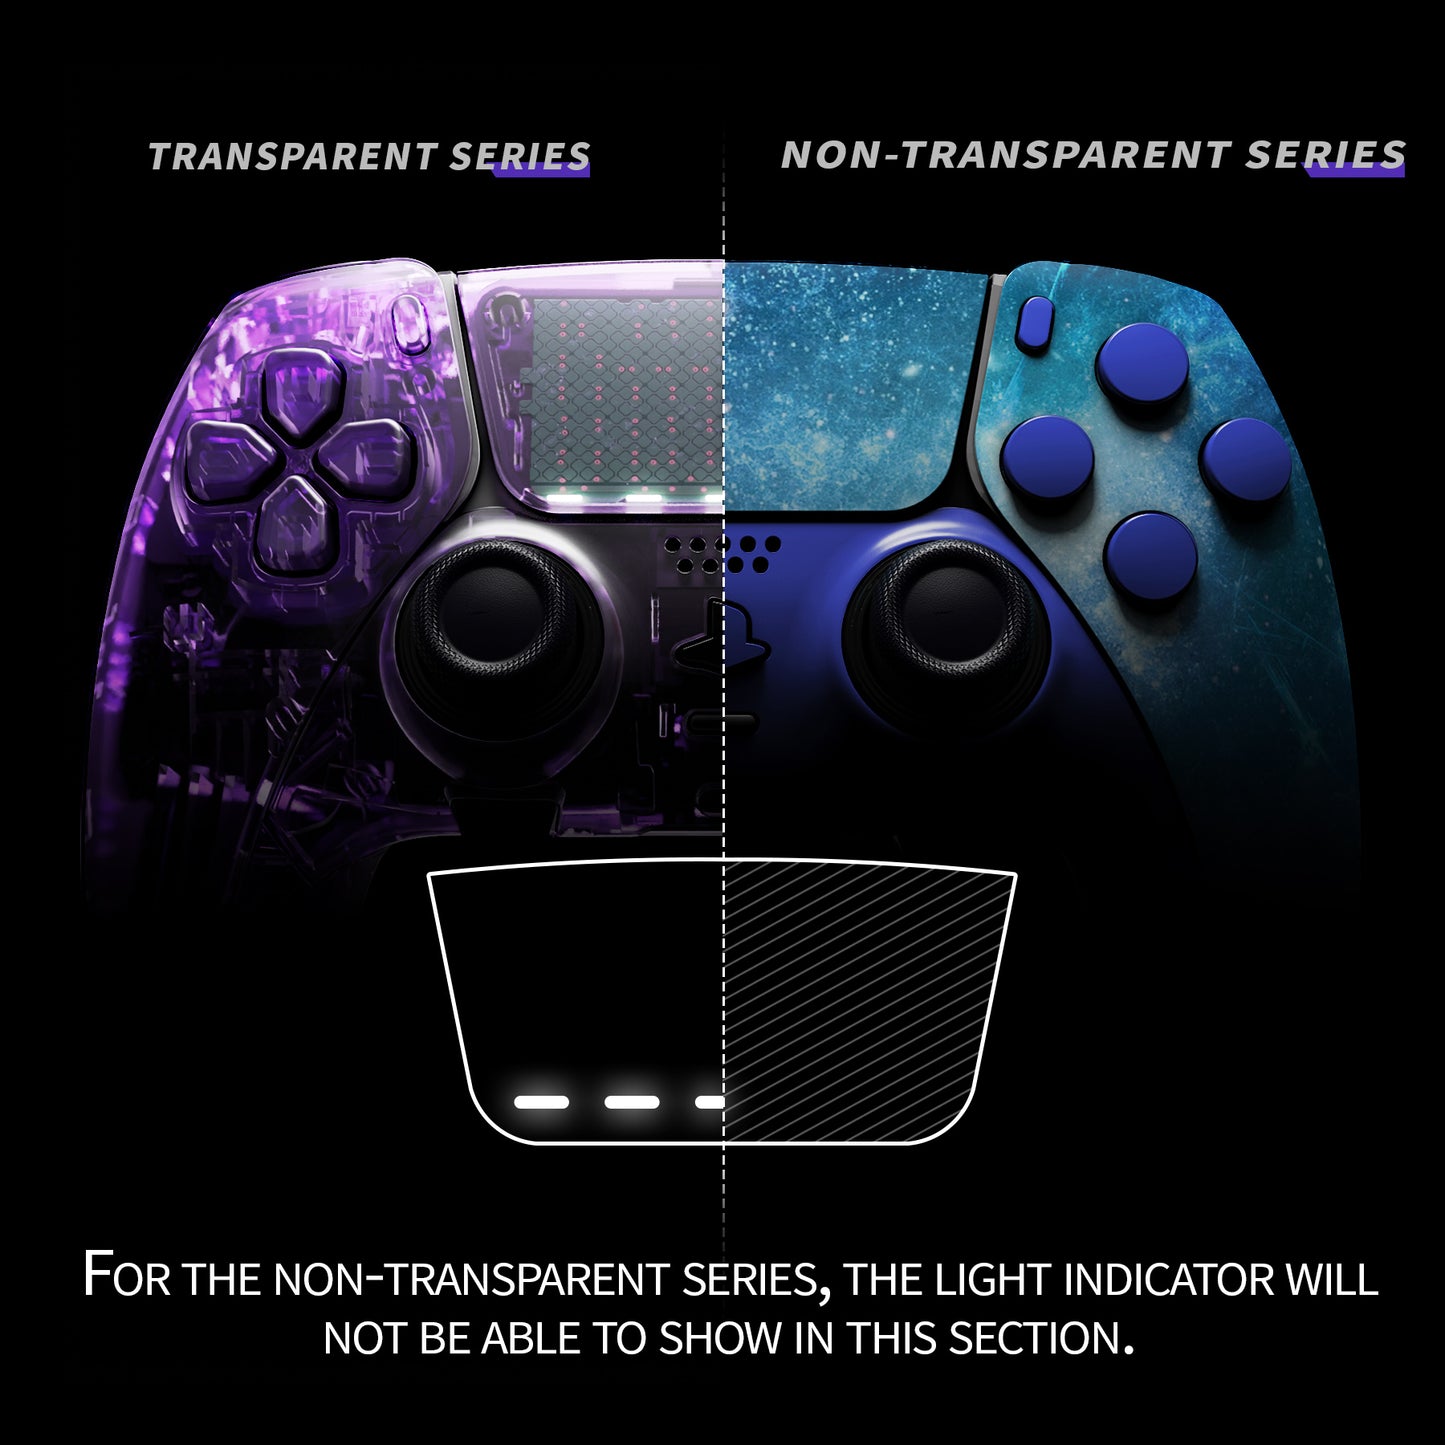 Replacement Full Set Shells with Buttons Compatible with PS5 Edge Controller - Blue Nebula eXtremeRate